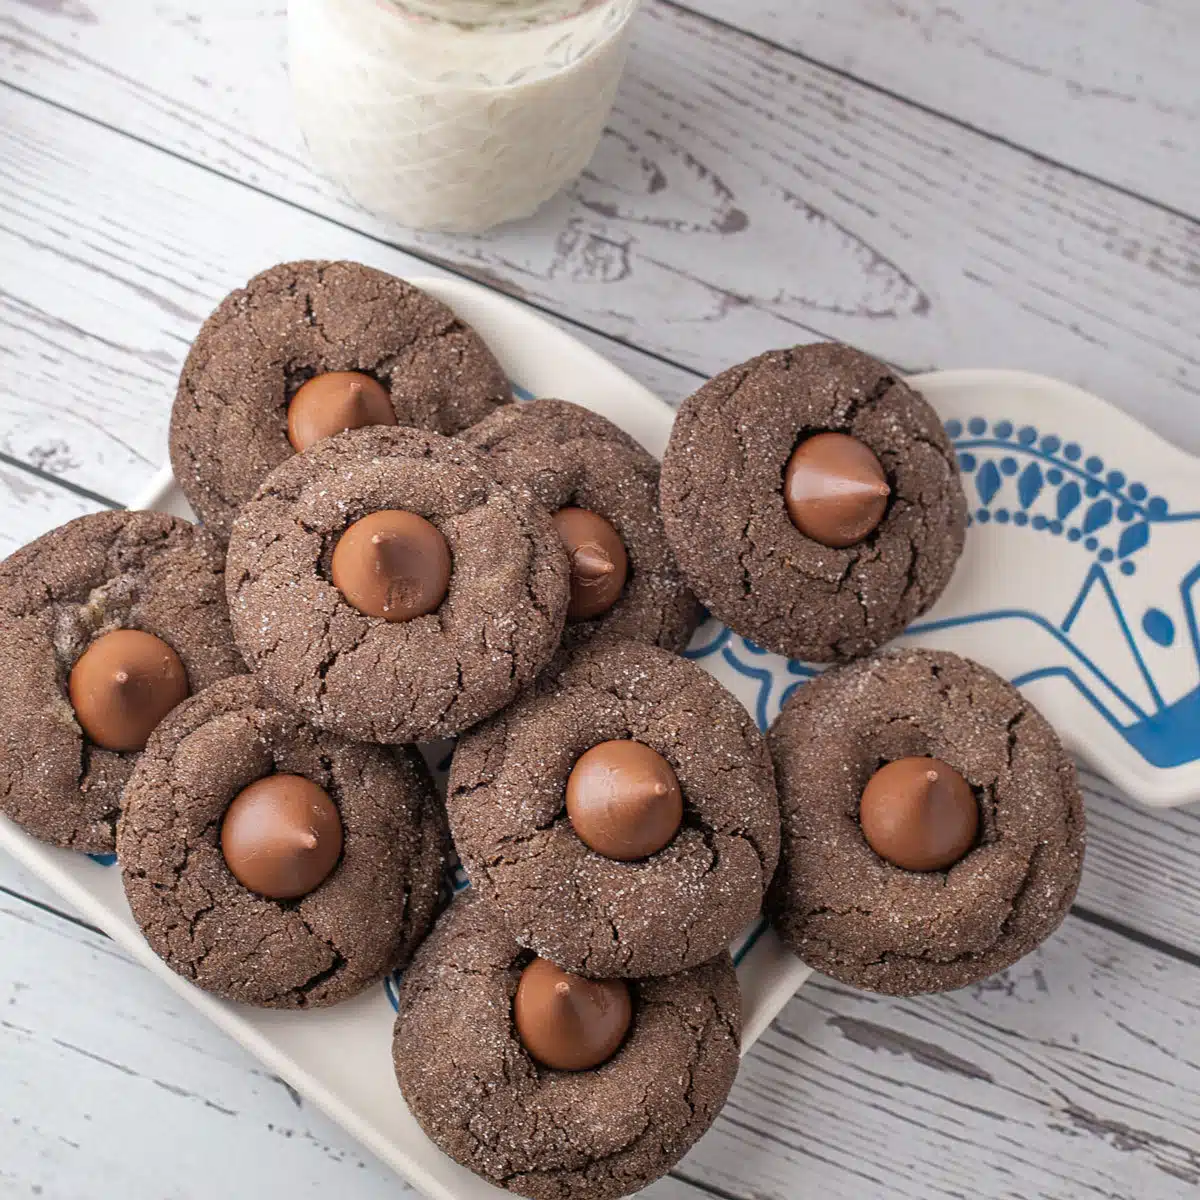 Best chocolate blossom cookies on serving plate with a quilted jar filled with milk.